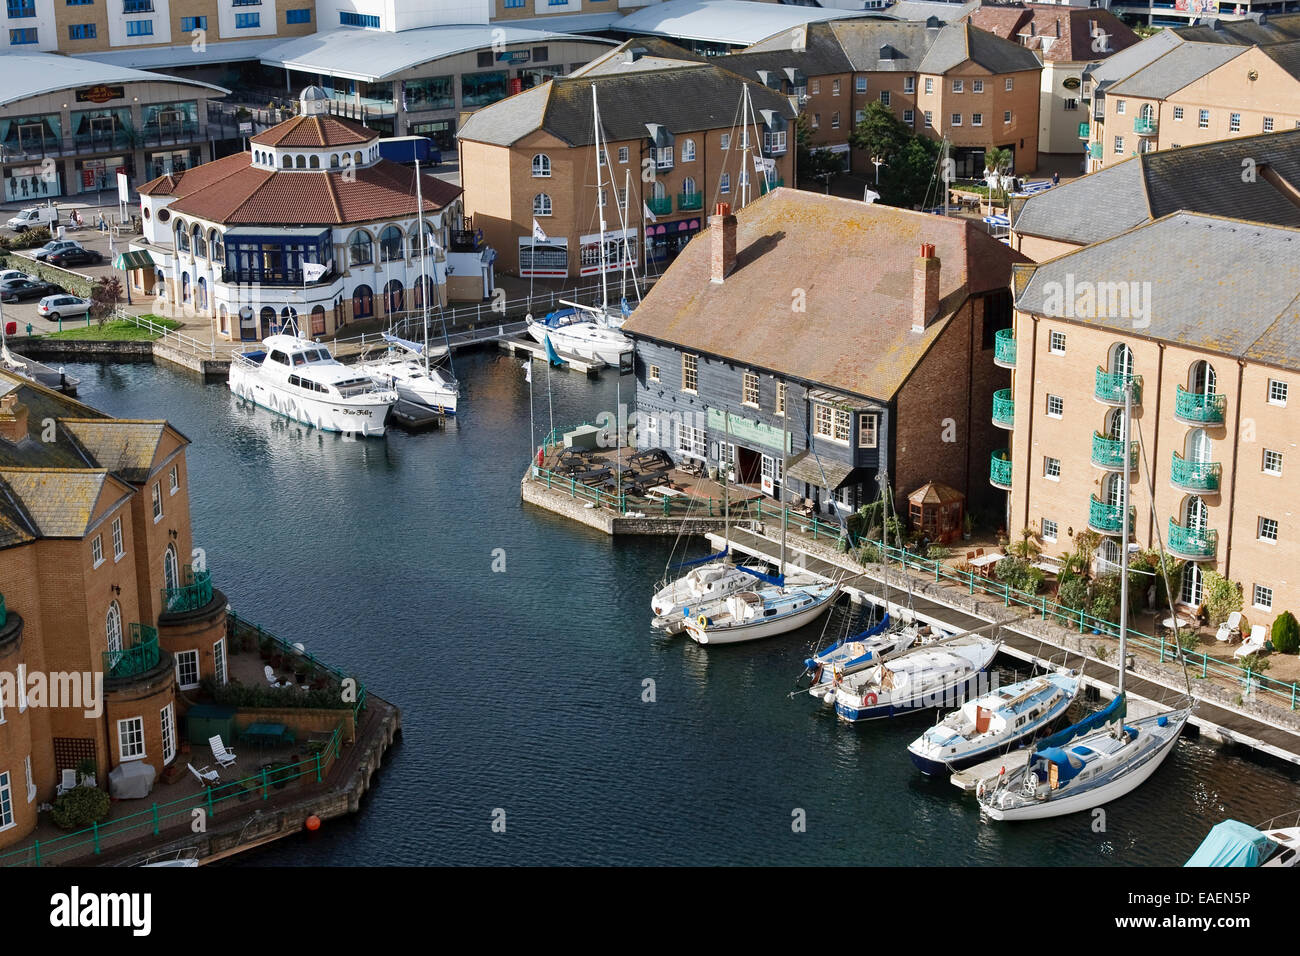 Homes and moorings, Master Mariner pub and restaurants within Brighton Marina, East Sussex, UK Stock Photo